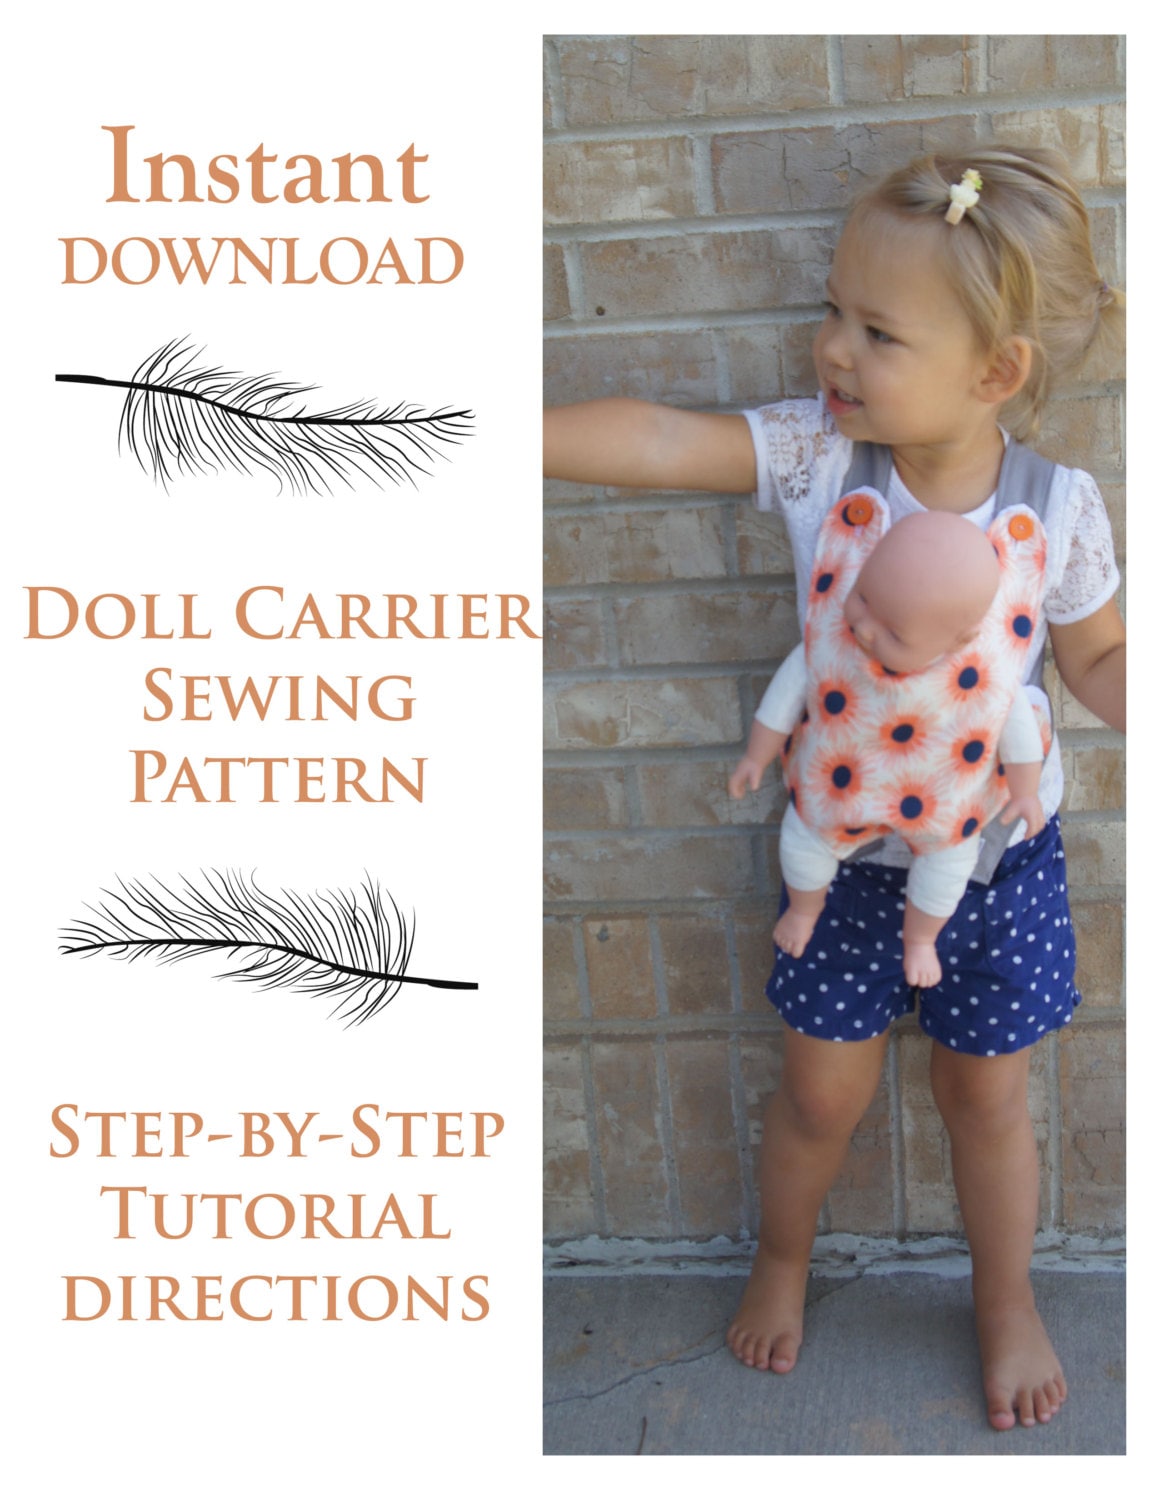 Baby Doll Carrier Sewing Pattern, Doll Carrier Sewing Tutorial